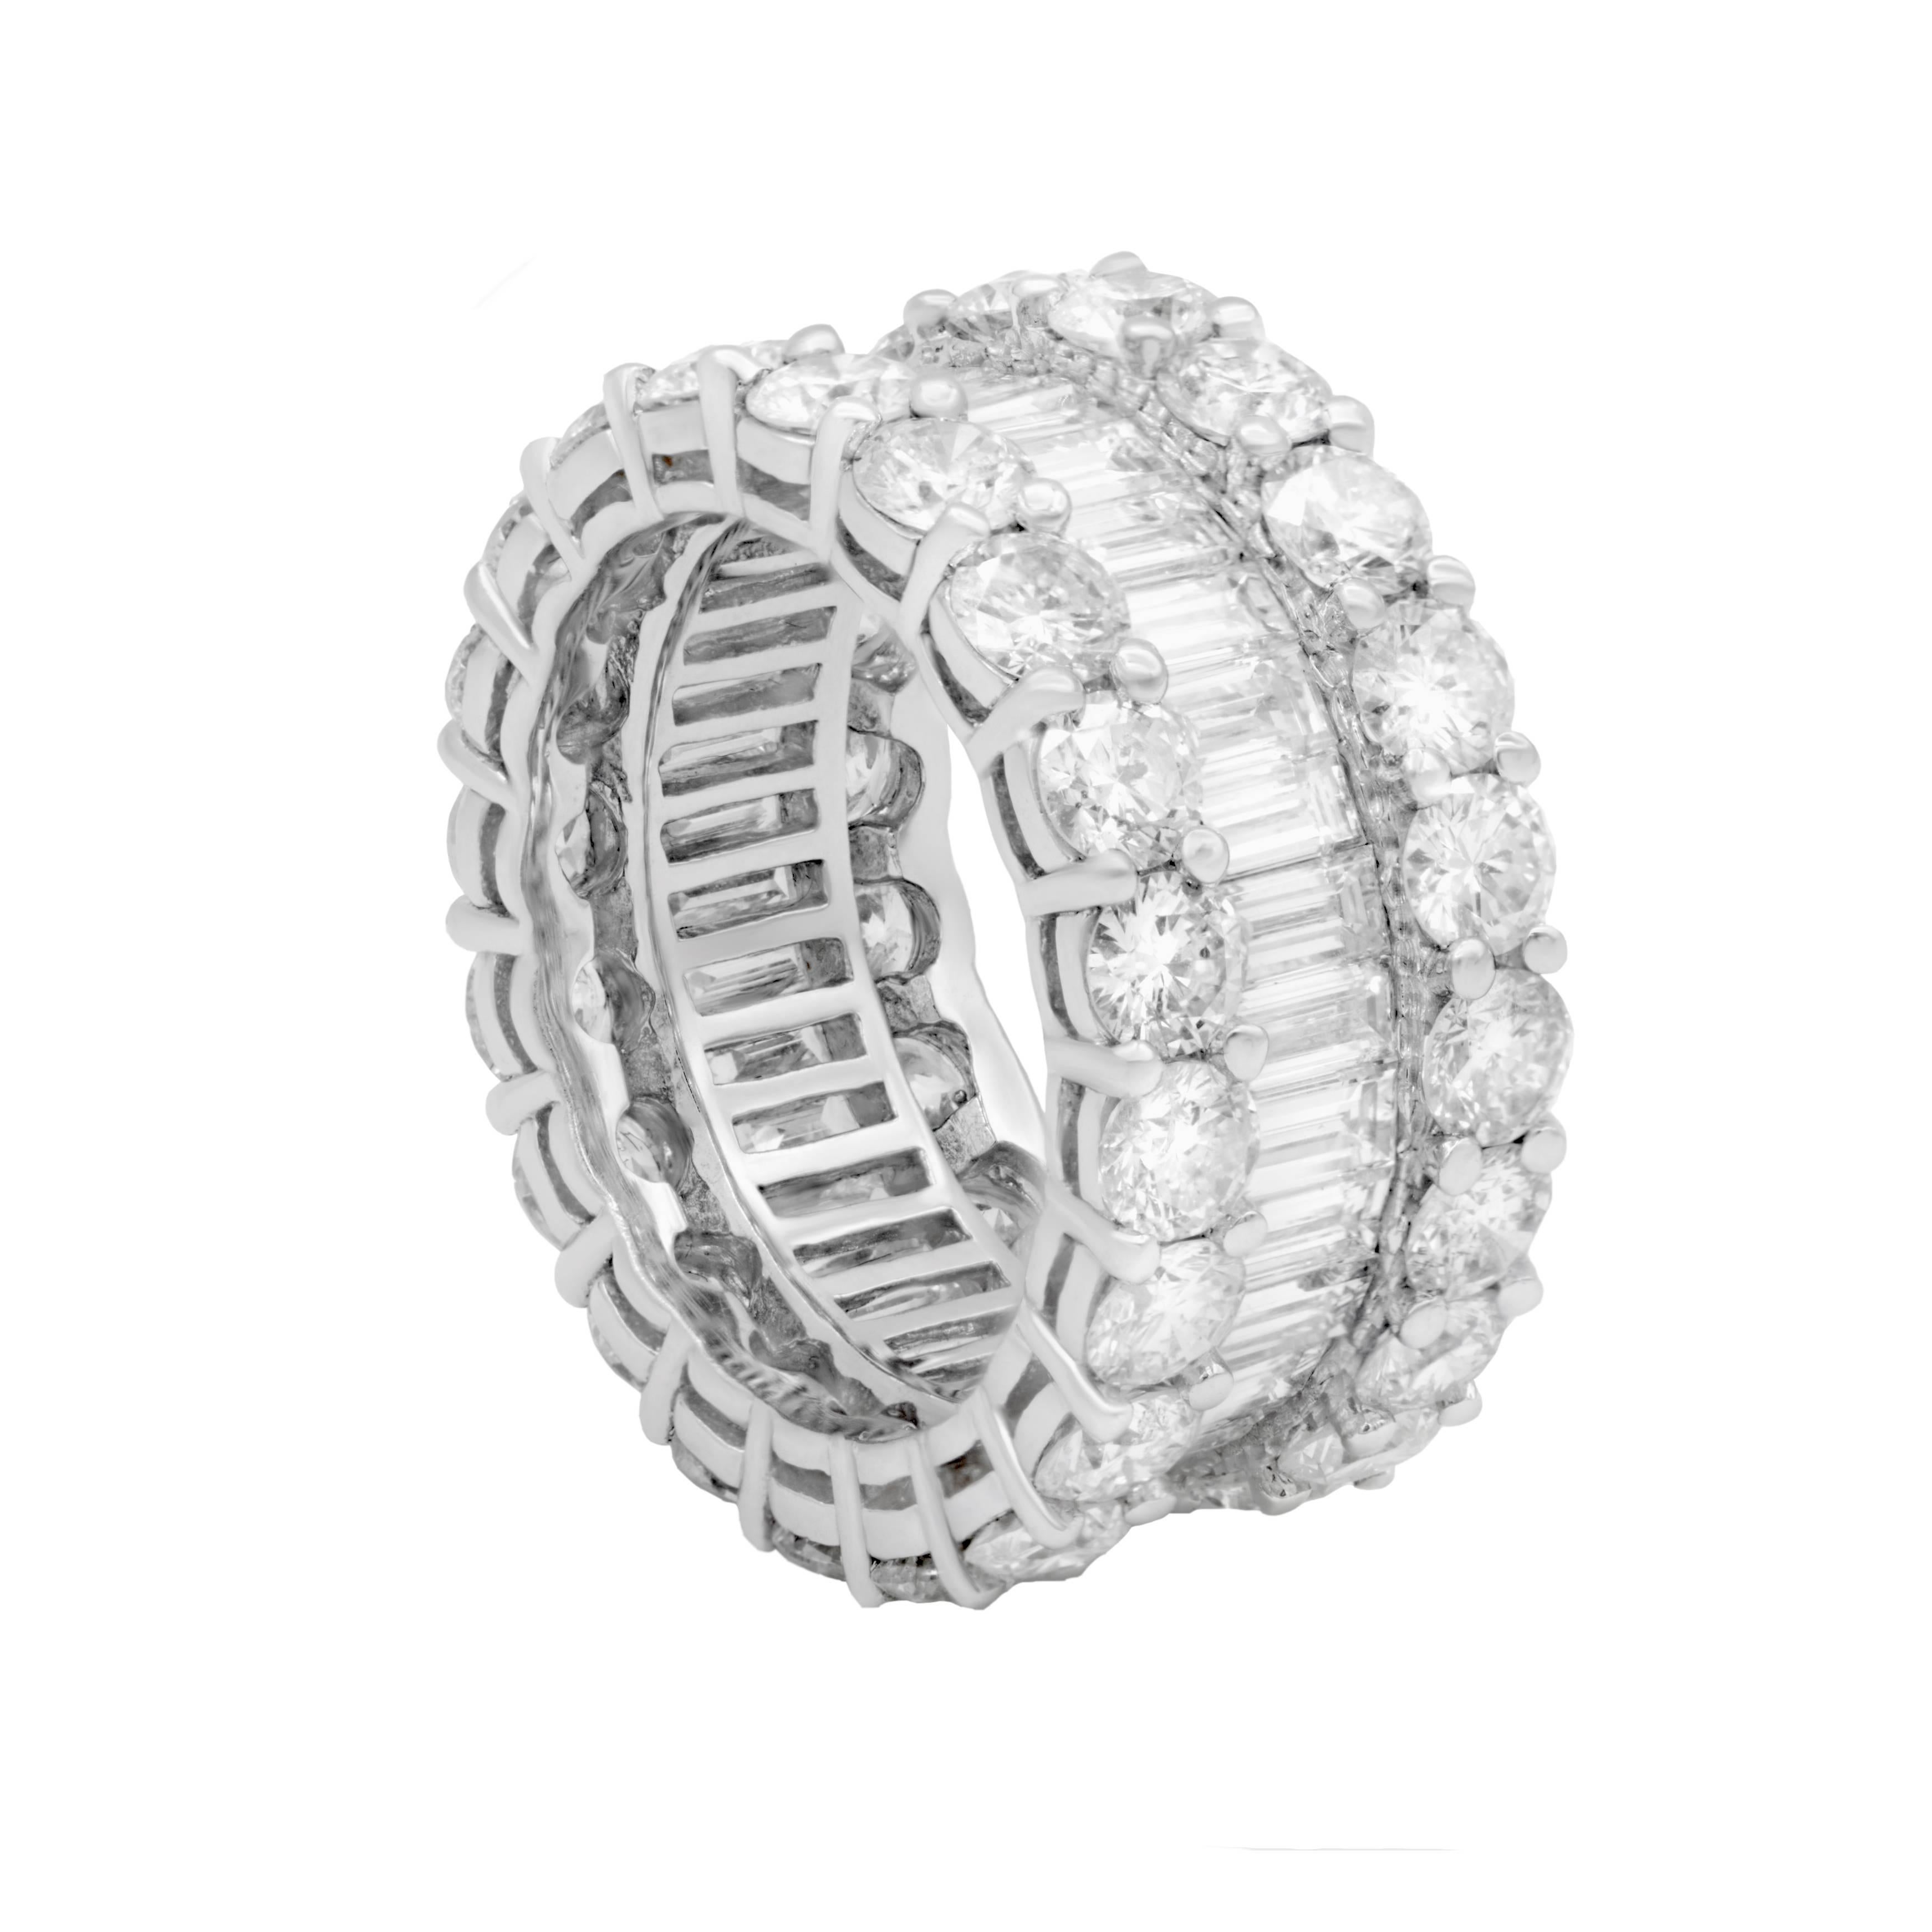 Magnificent diamond eternity band with one row of baguette diamonds and surrounded by  round cut diamonds all the way round, weighing 9.60 carats total FG color and Slightly Included clarity set in custom made 18 karat white gold mounting.  
Finger